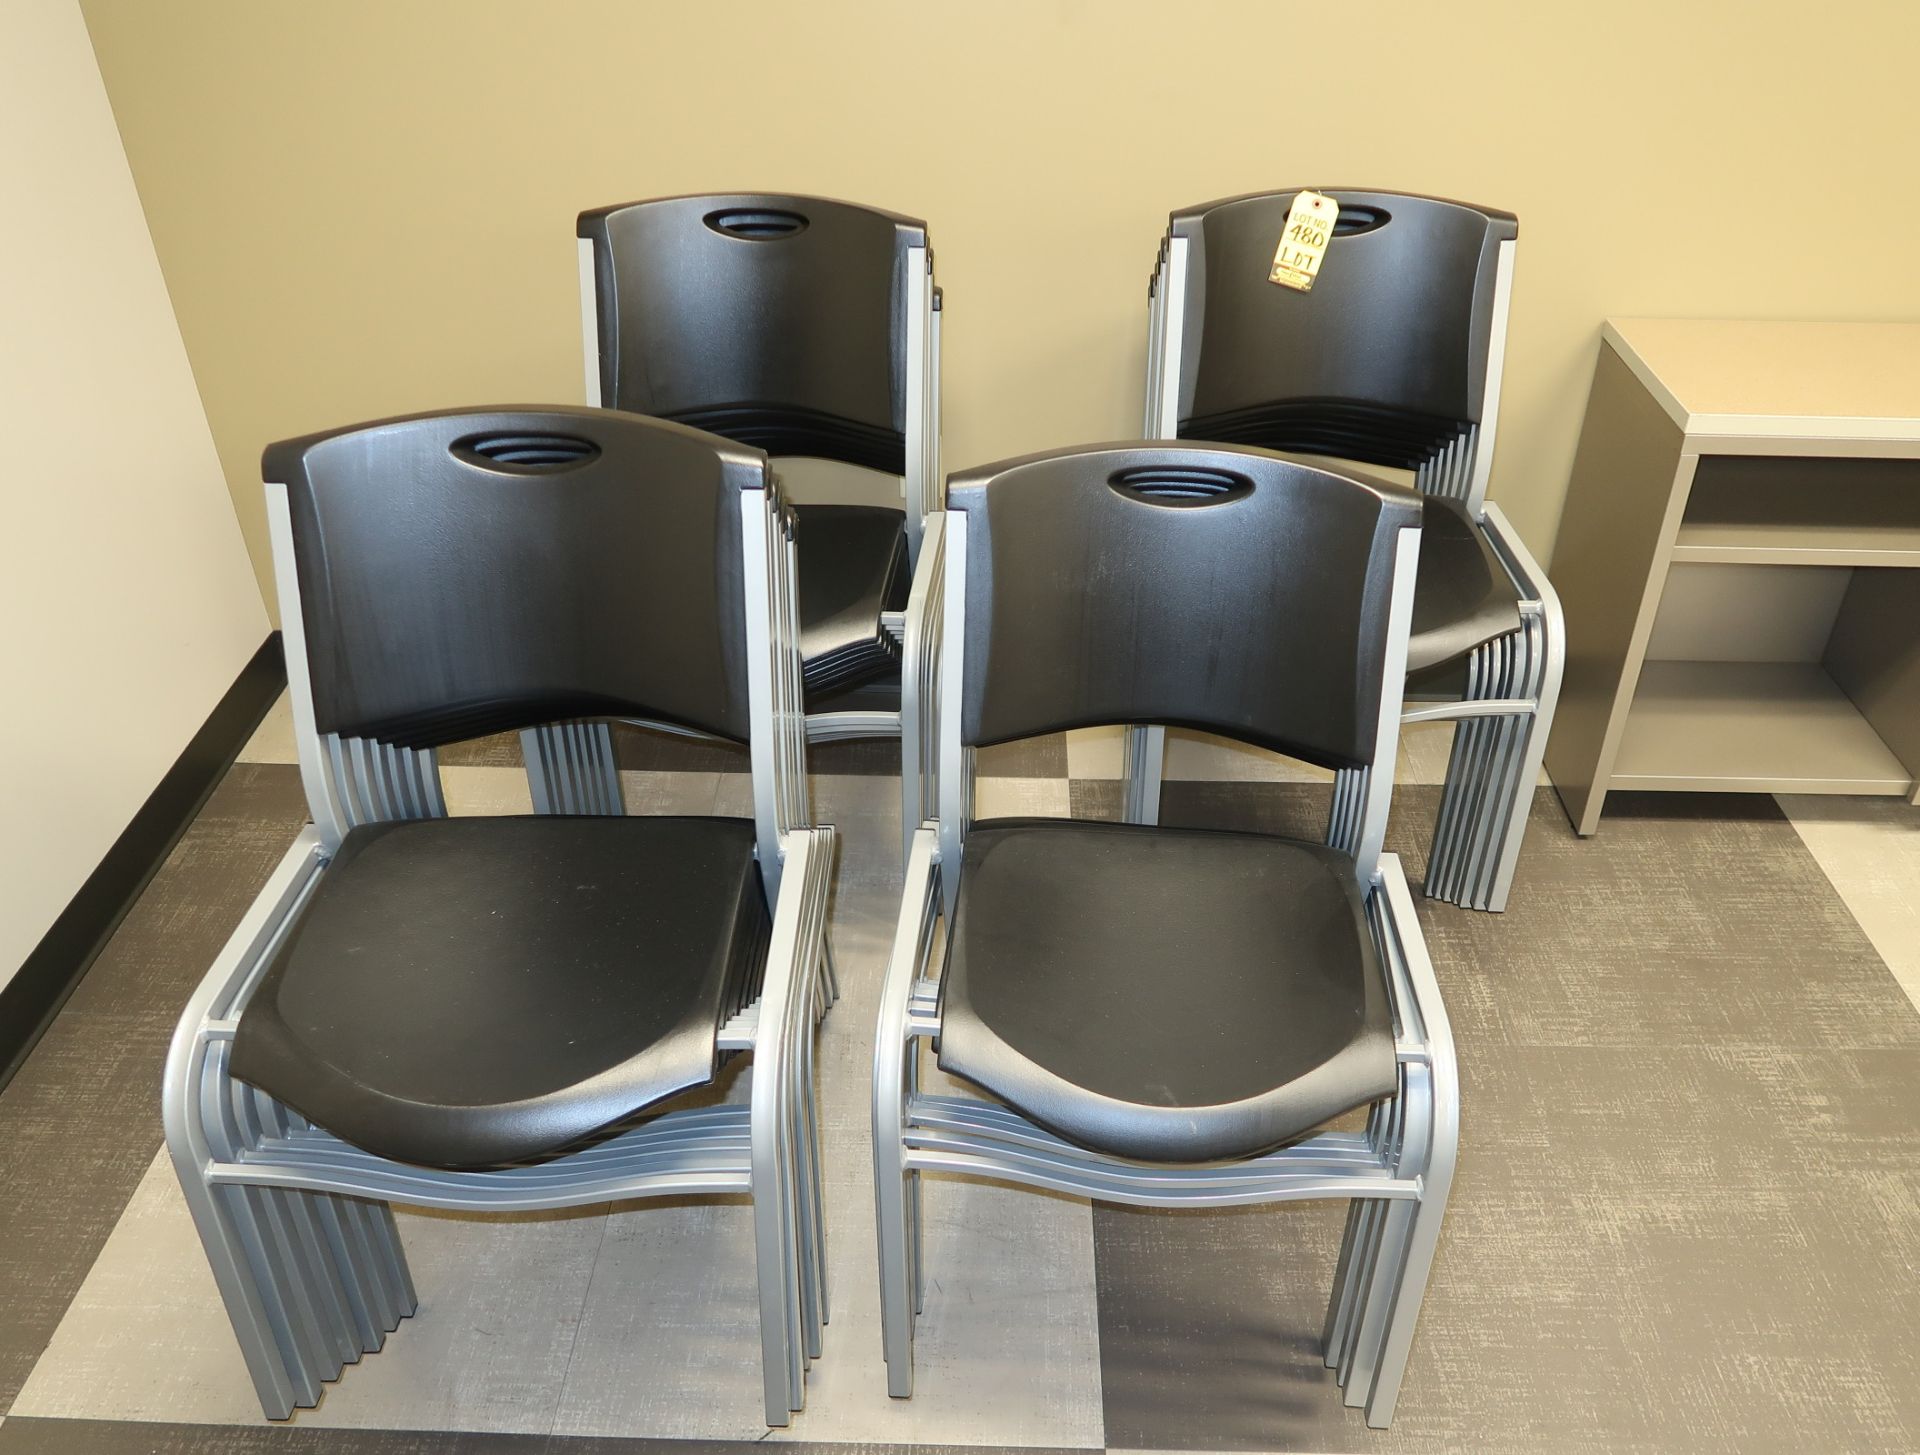 STACKABLE CHAIRS (LOCATED AT 2302 N. 7TH ST. PHOENIX, AZ 85006)